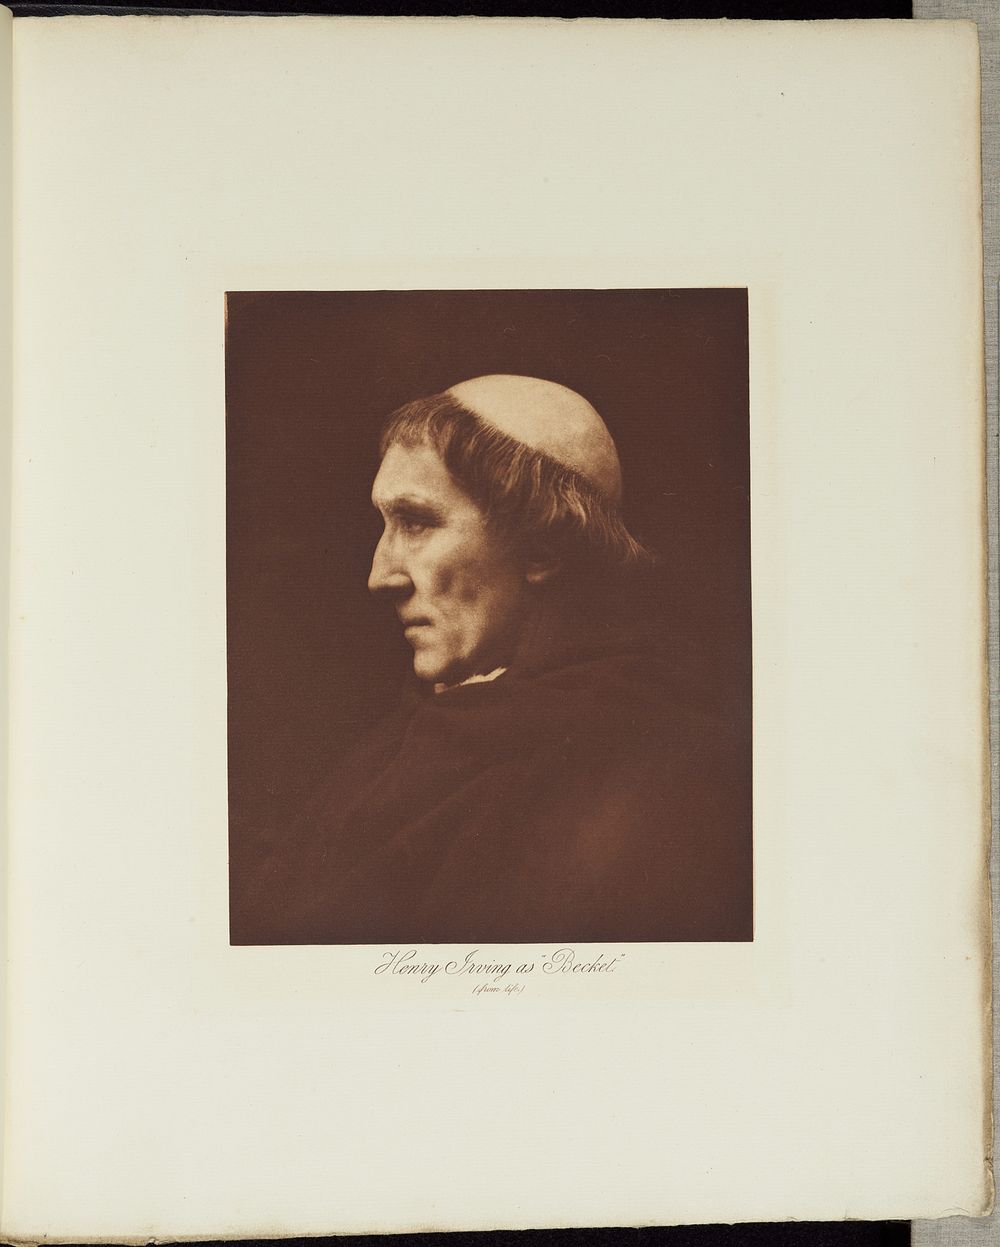 Henry Irving (as "Becket") by Henry Herschel Hay Cameron